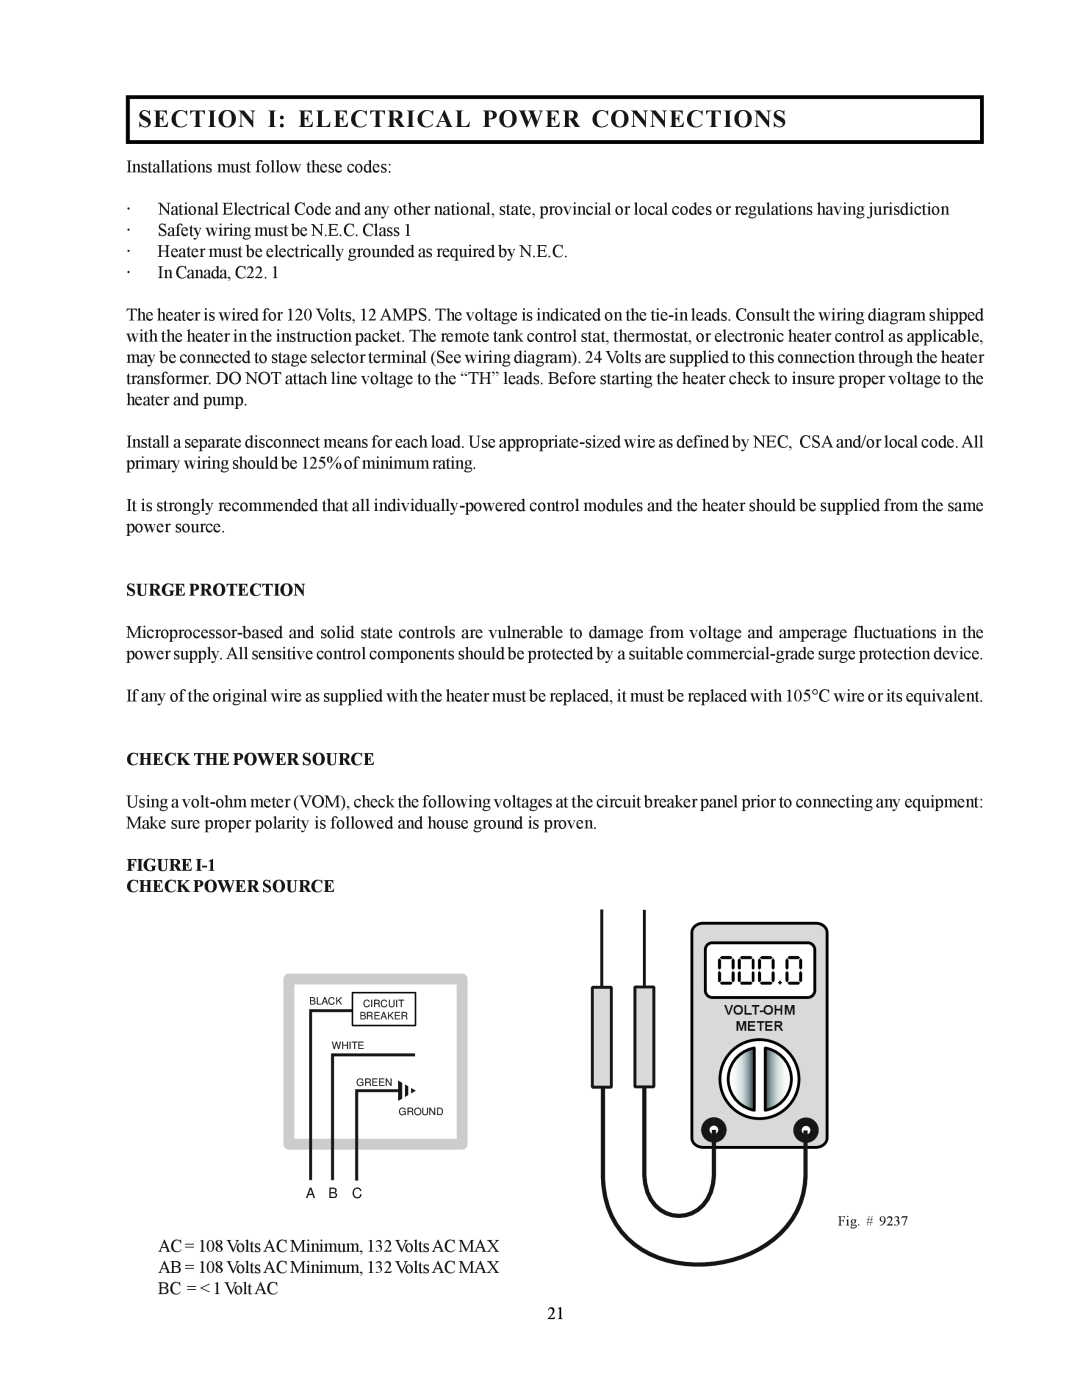 Raypak 122-322 Section I Electrical Power Connections, Surge Protection, Check The Power Source, Figure Check Power Source 